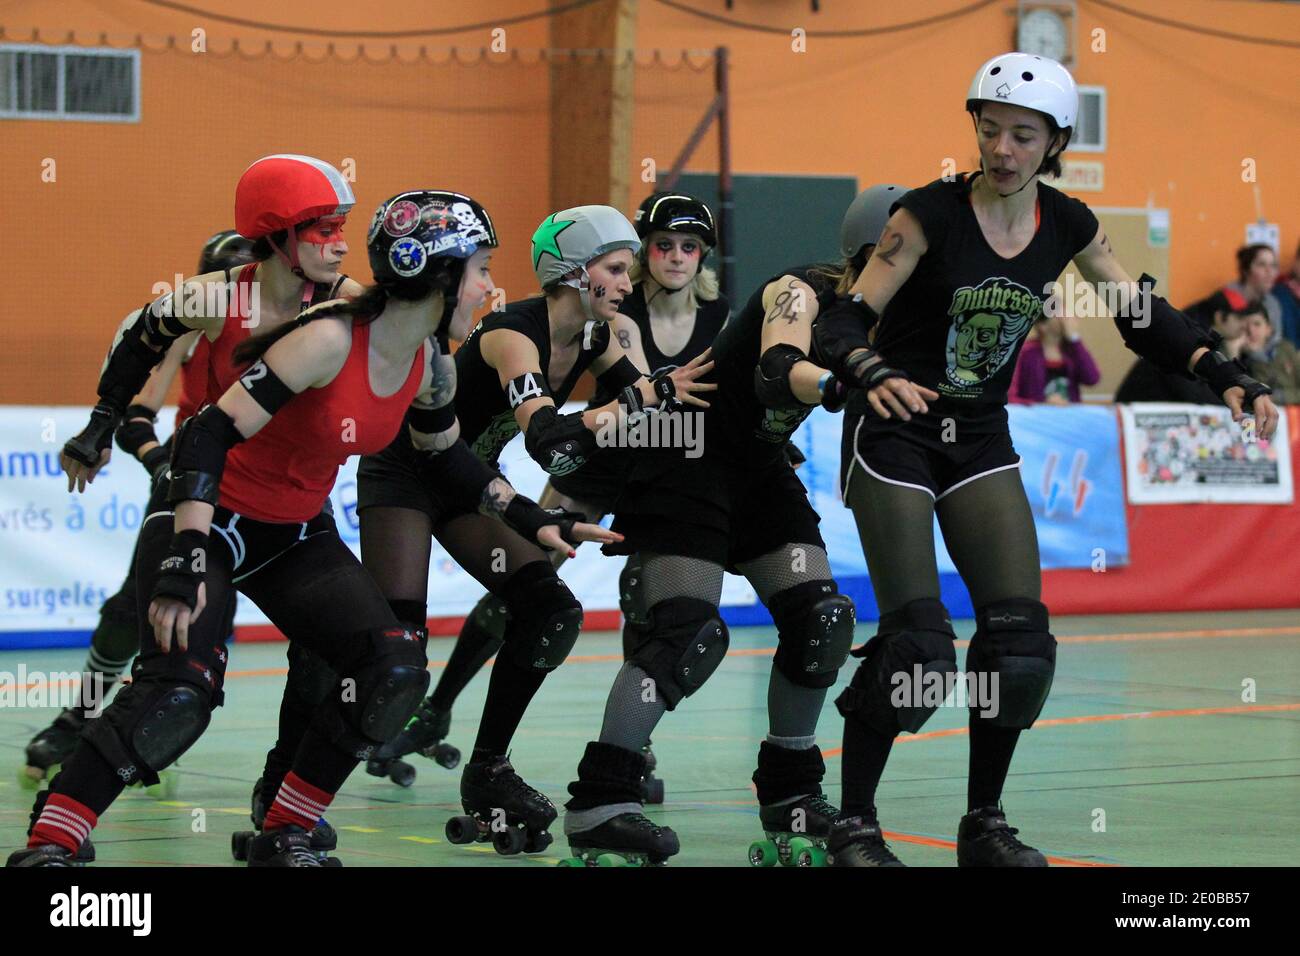 Paris Roller Girls (red) playing a match against Duchesses Nantes Roller  Derby Girls (green) during a national tournament in Nantes, western France  on March 17, 2012. Roller Derby is an American-invented contact